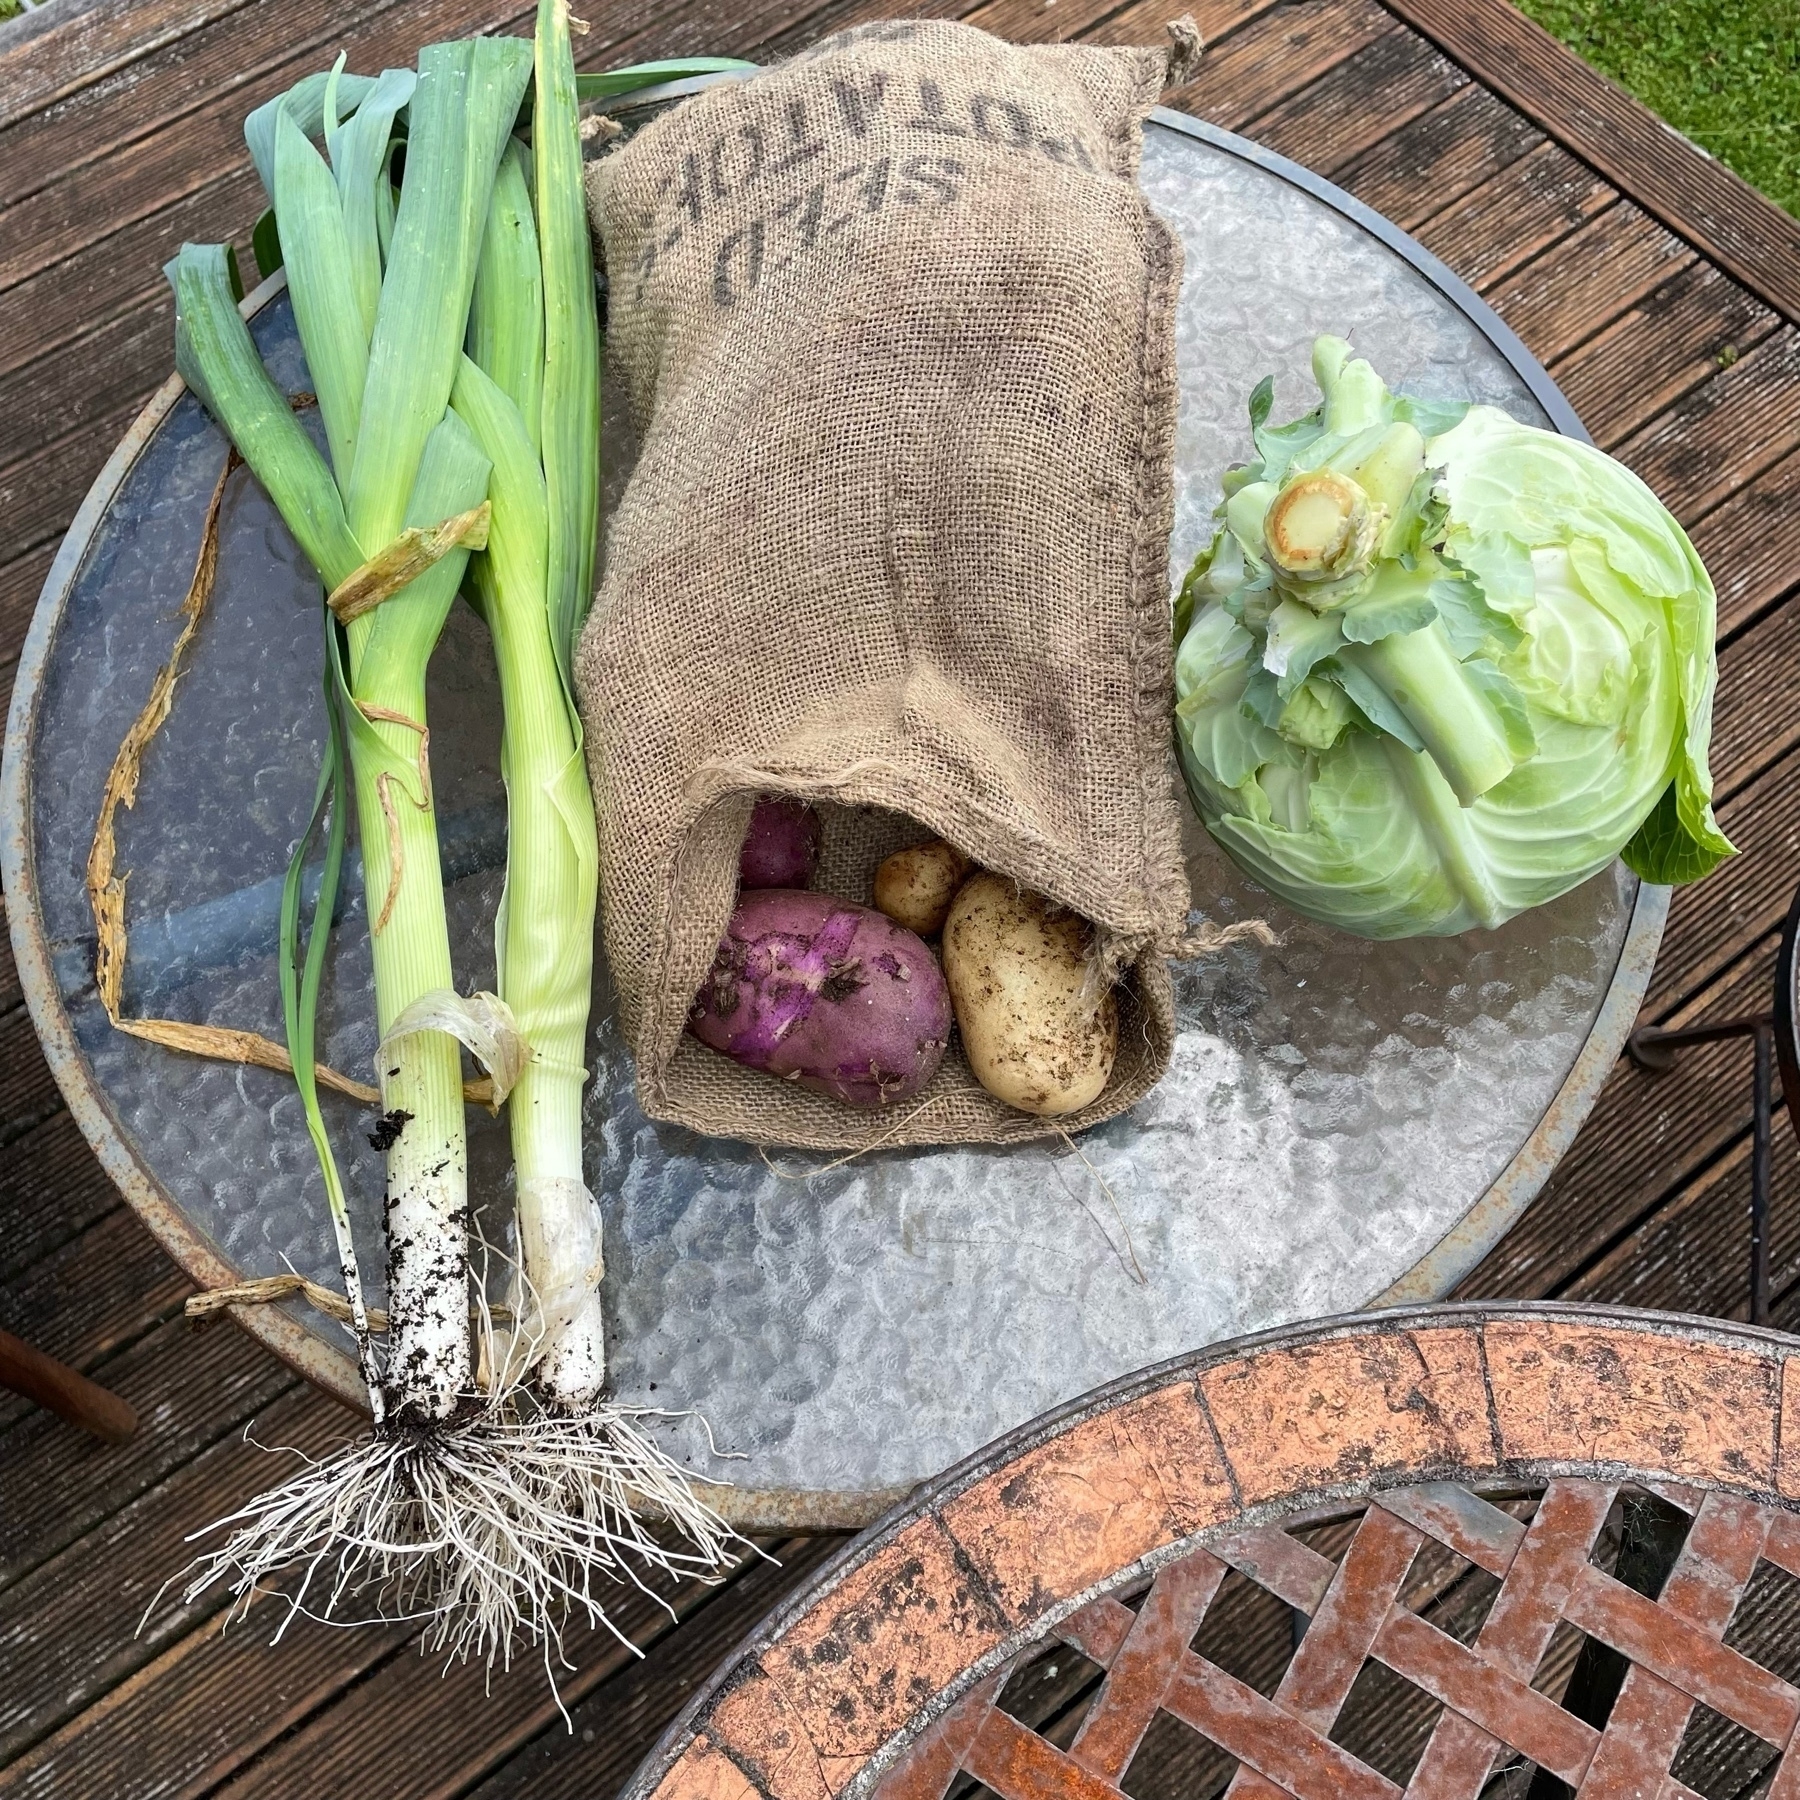 Leeks, multi-coloured potatoes spilling out of a hessian bag, and a cabbage on a rustic table. 